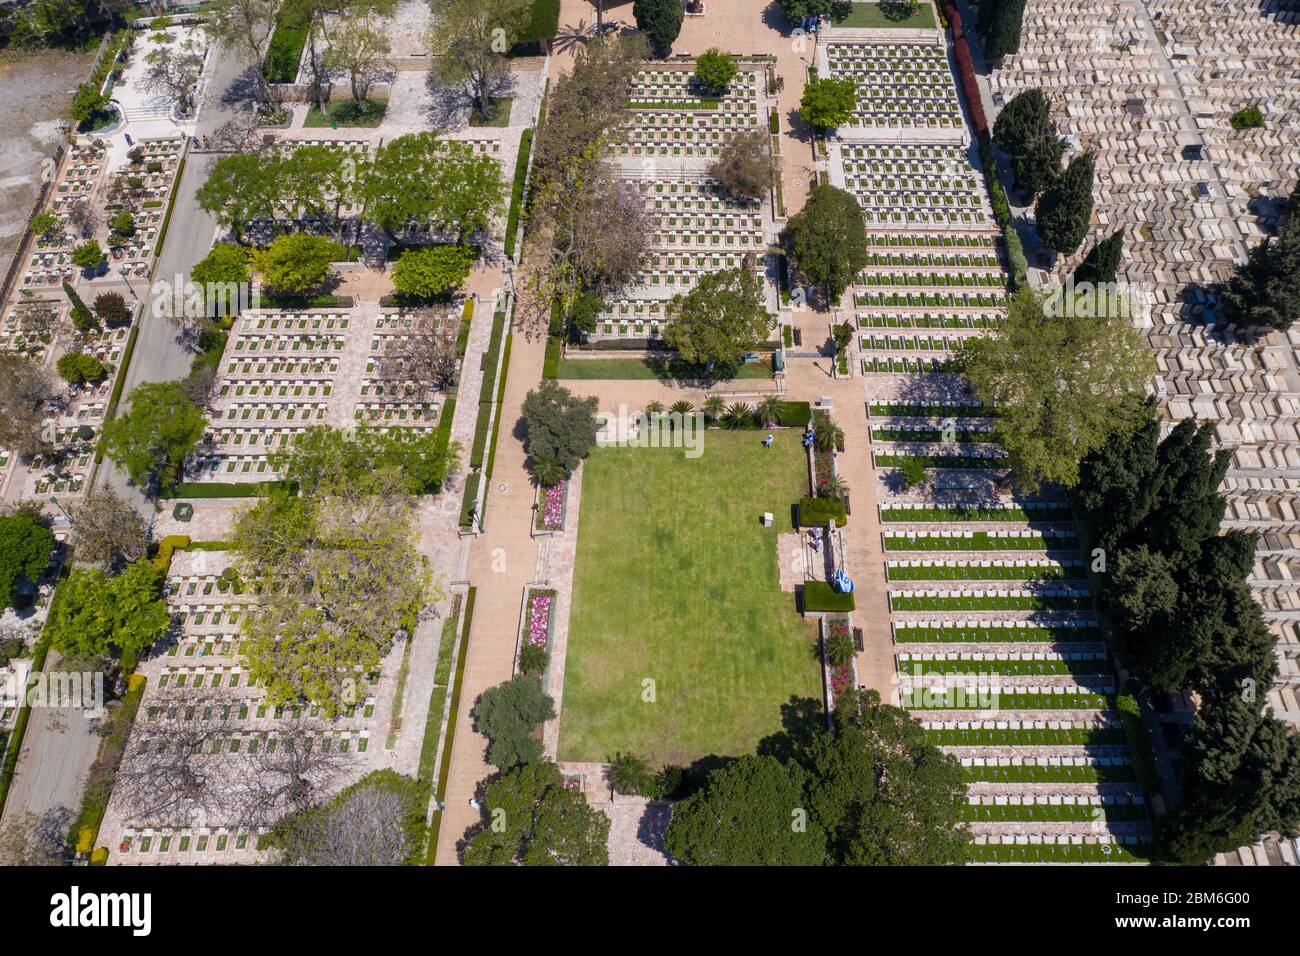 Military Cemetery at Memorial Day with Waving flag and Army officers in White uniform, Aerial view. Stock Photo